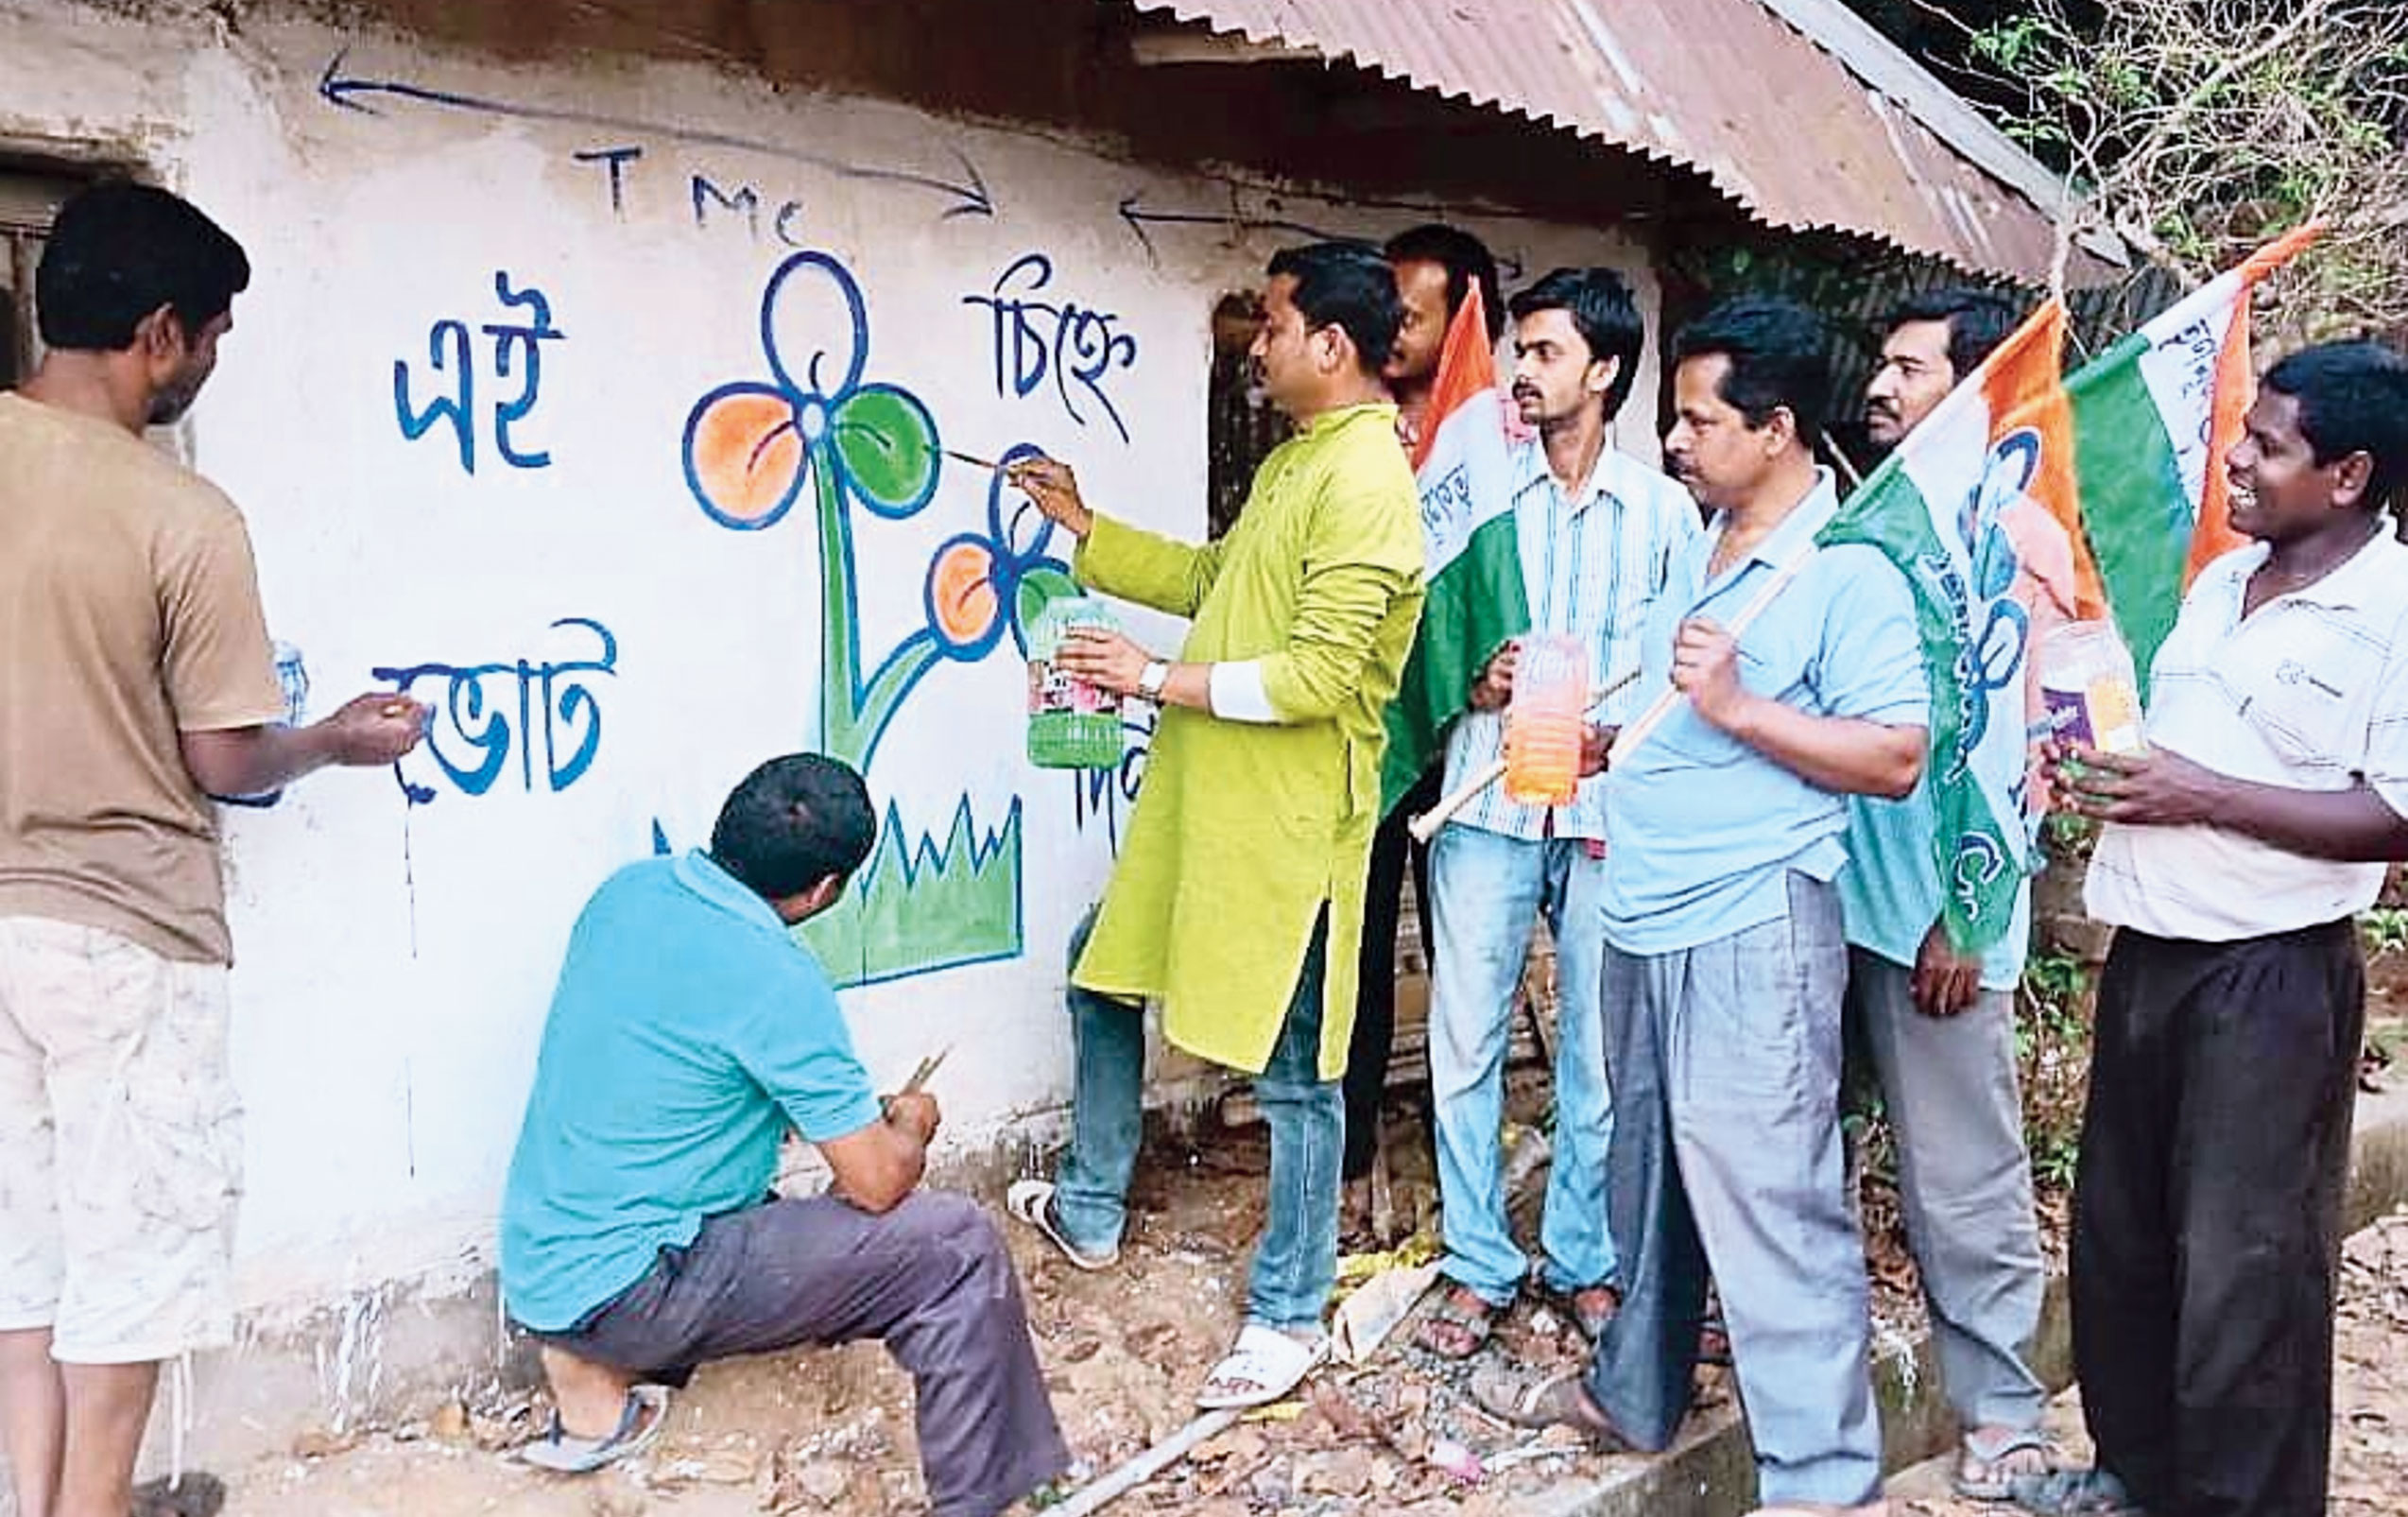 Trinamul members painting their party symbol on a wall in Midnapore.